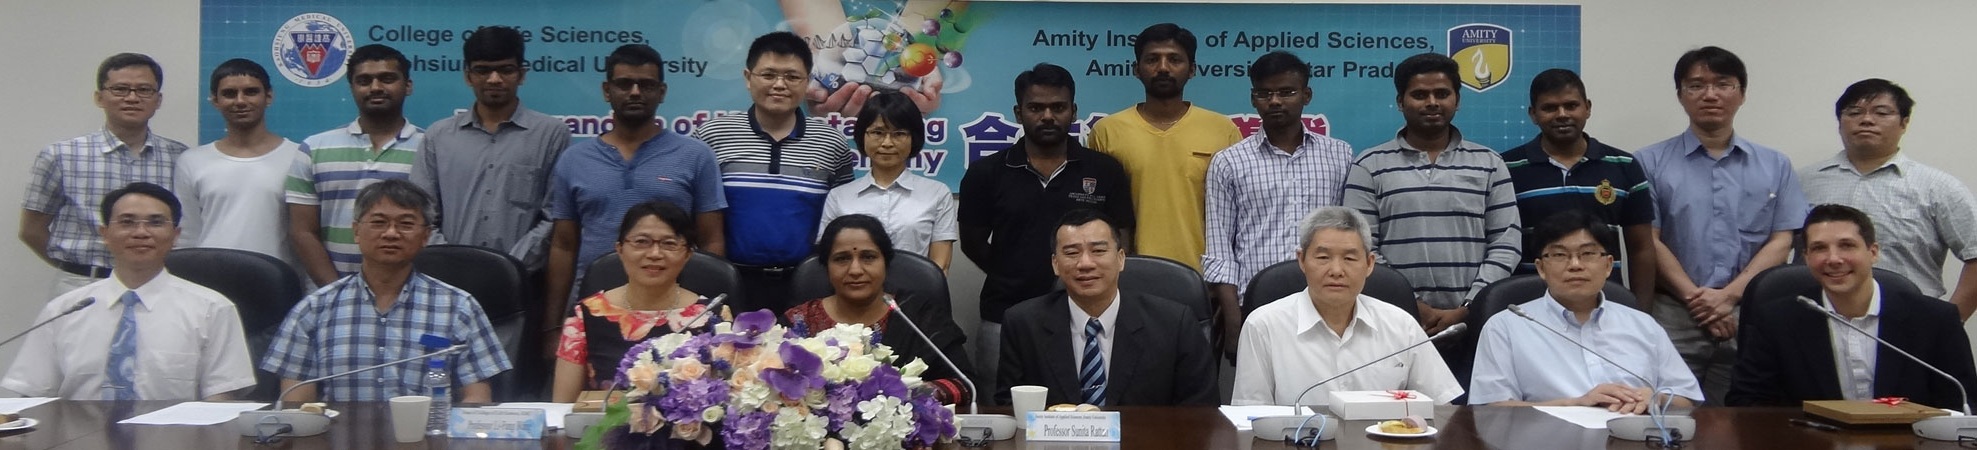 Amity Institute of Applied Science, Noida Image